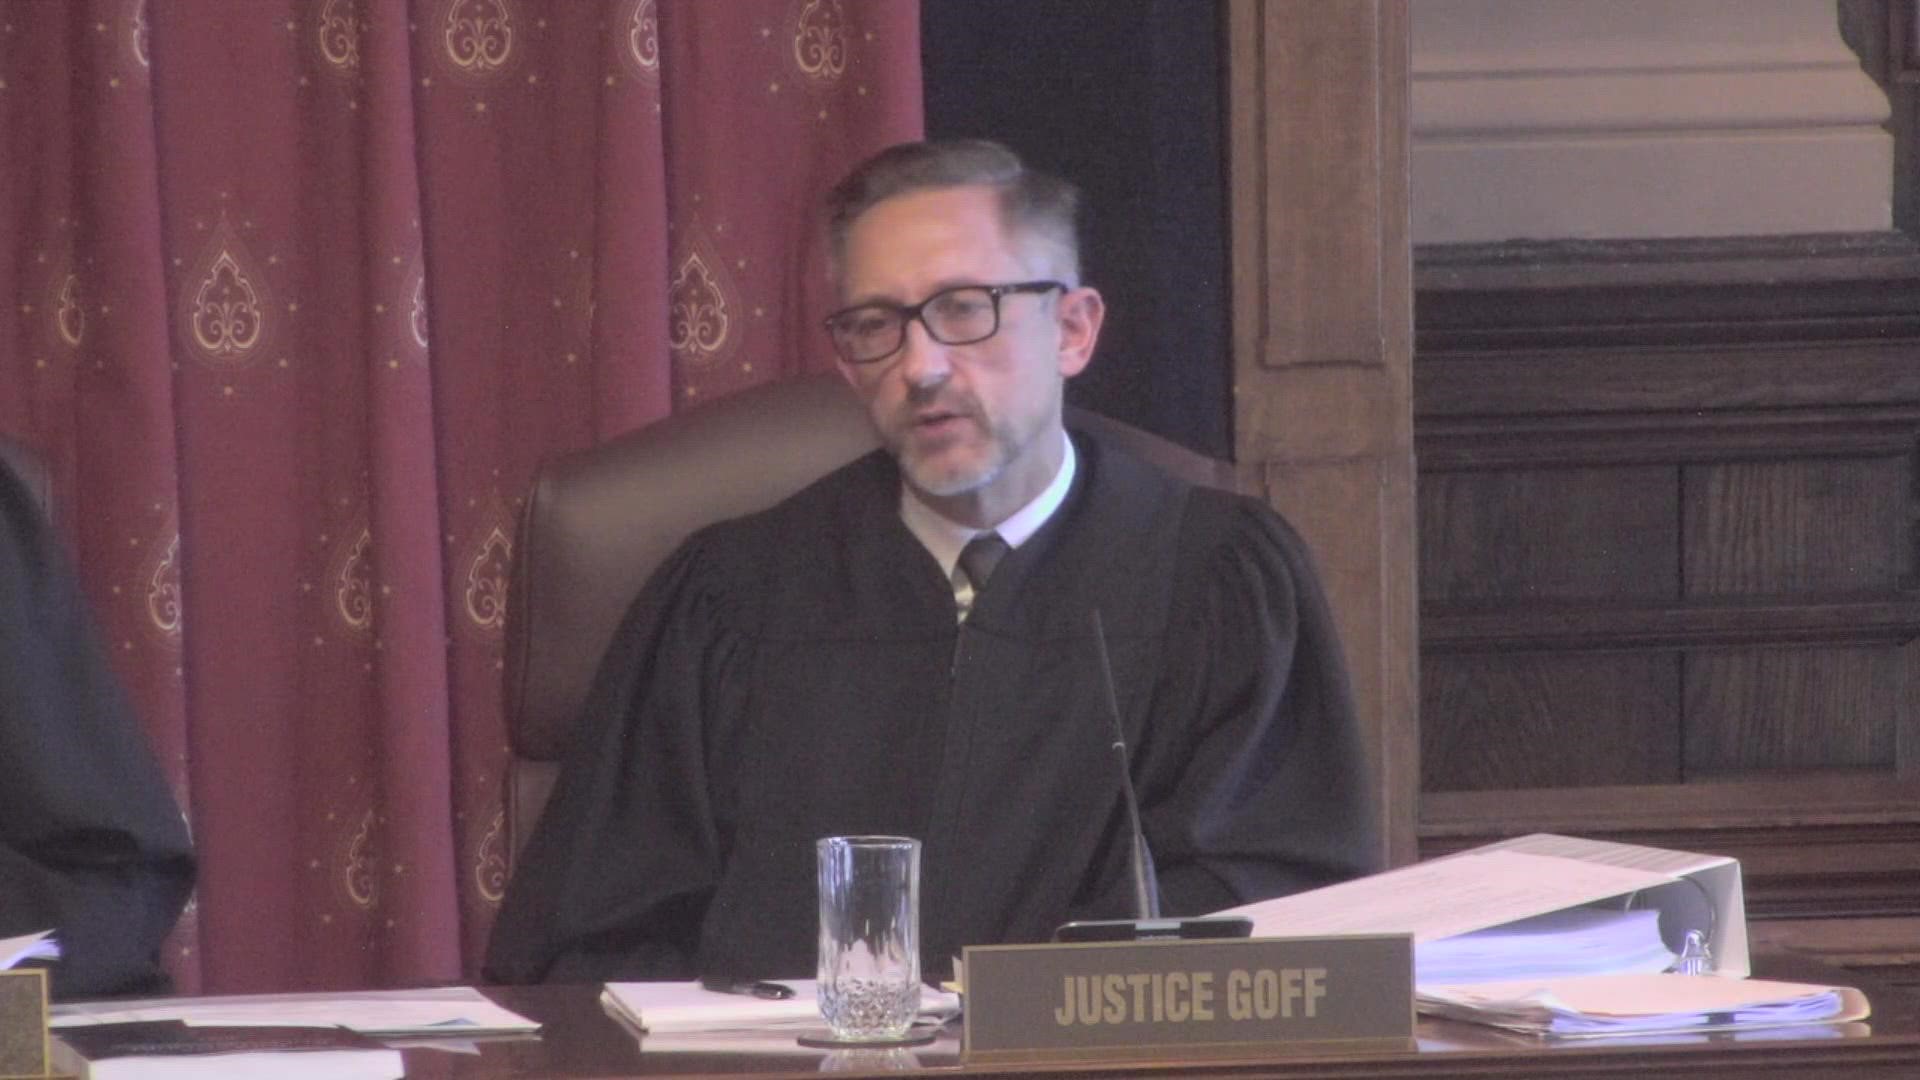 The Indiana Supreme Court heard arguments on the state's near-total abortion ban Jan. 19, 2023.